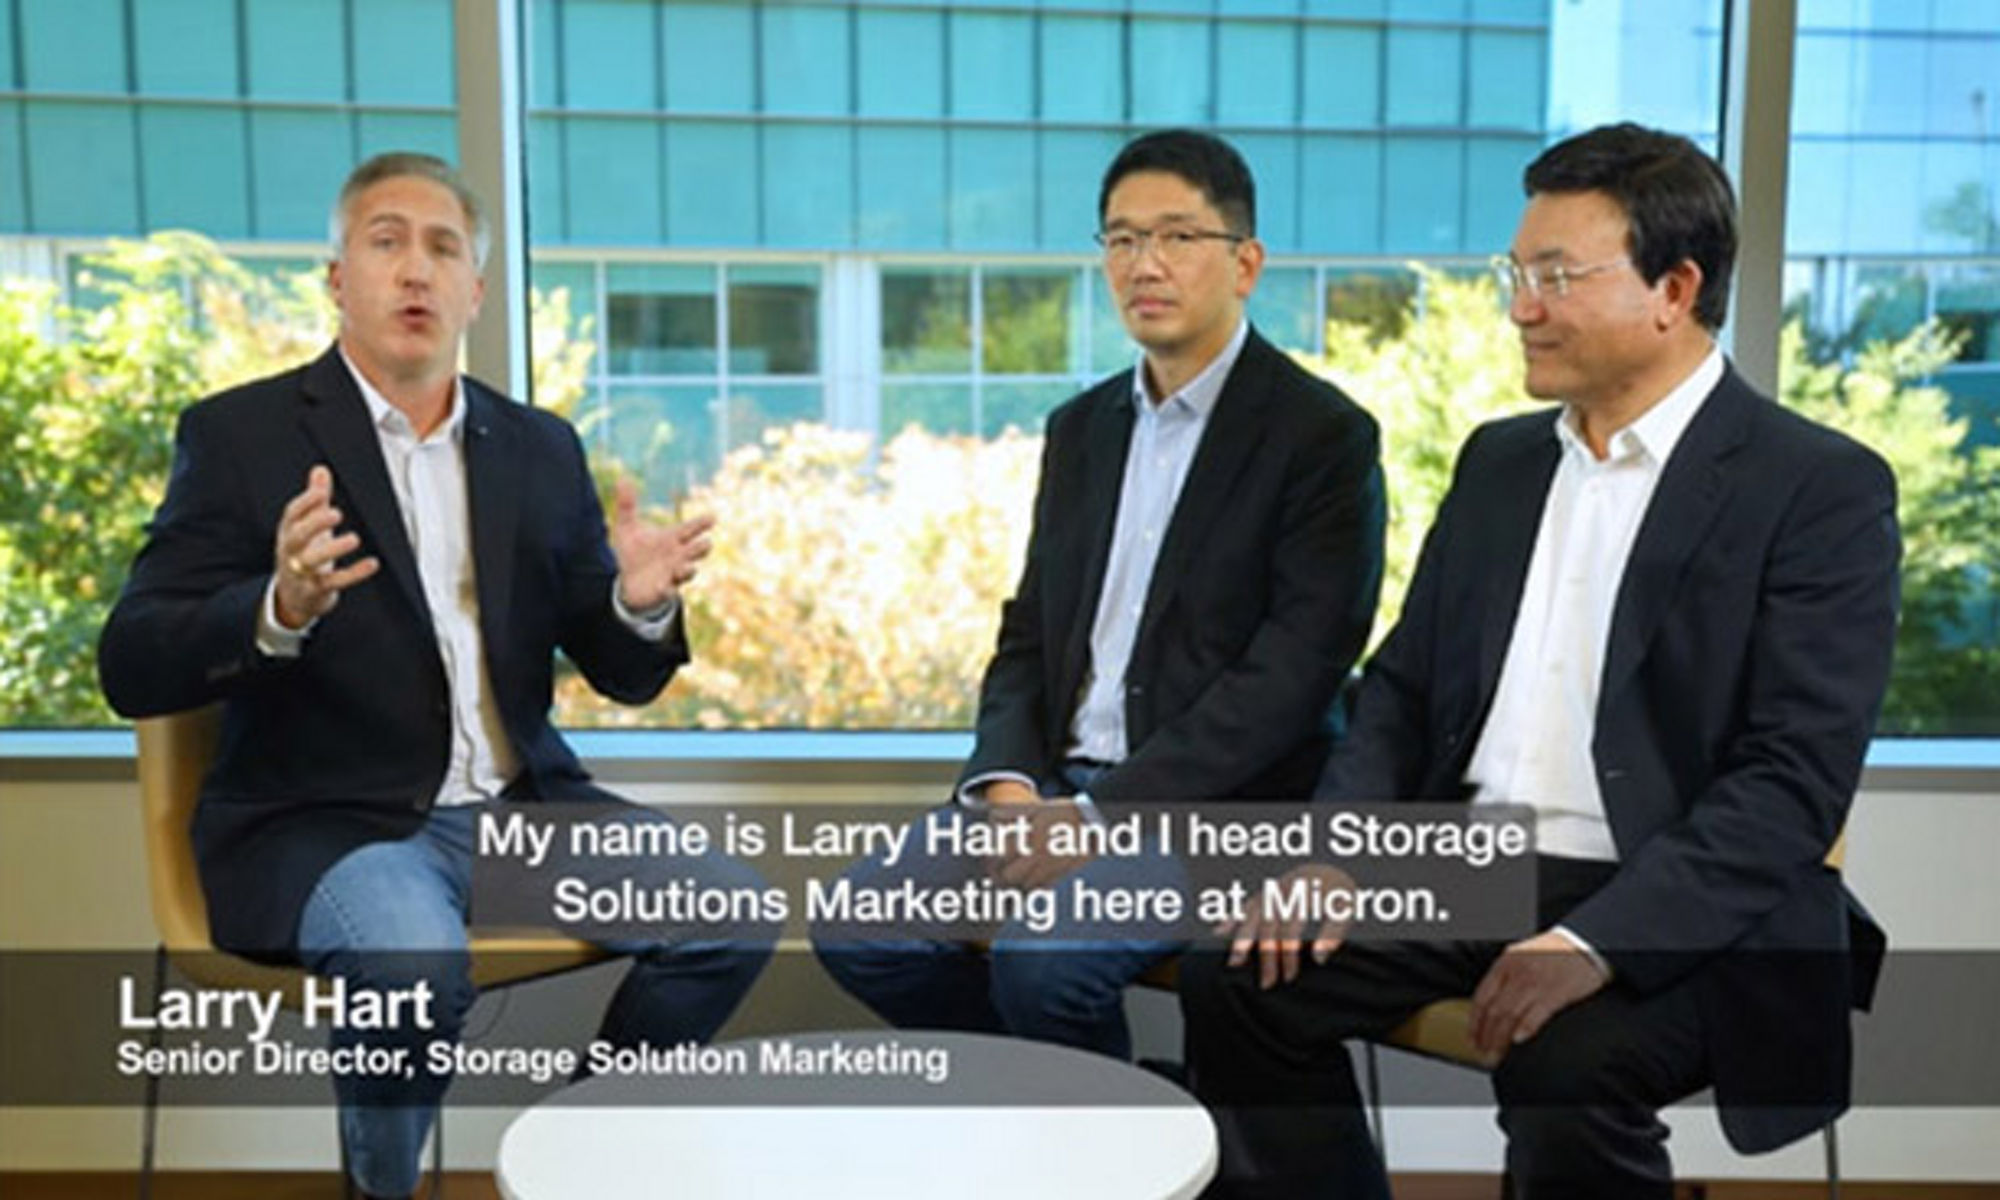 video of three men Co-founder, Wally Liaw, Product Management Director Patrick Chu and Micron’s Sr. Director Solution Marketing Larry Hart having a discussion